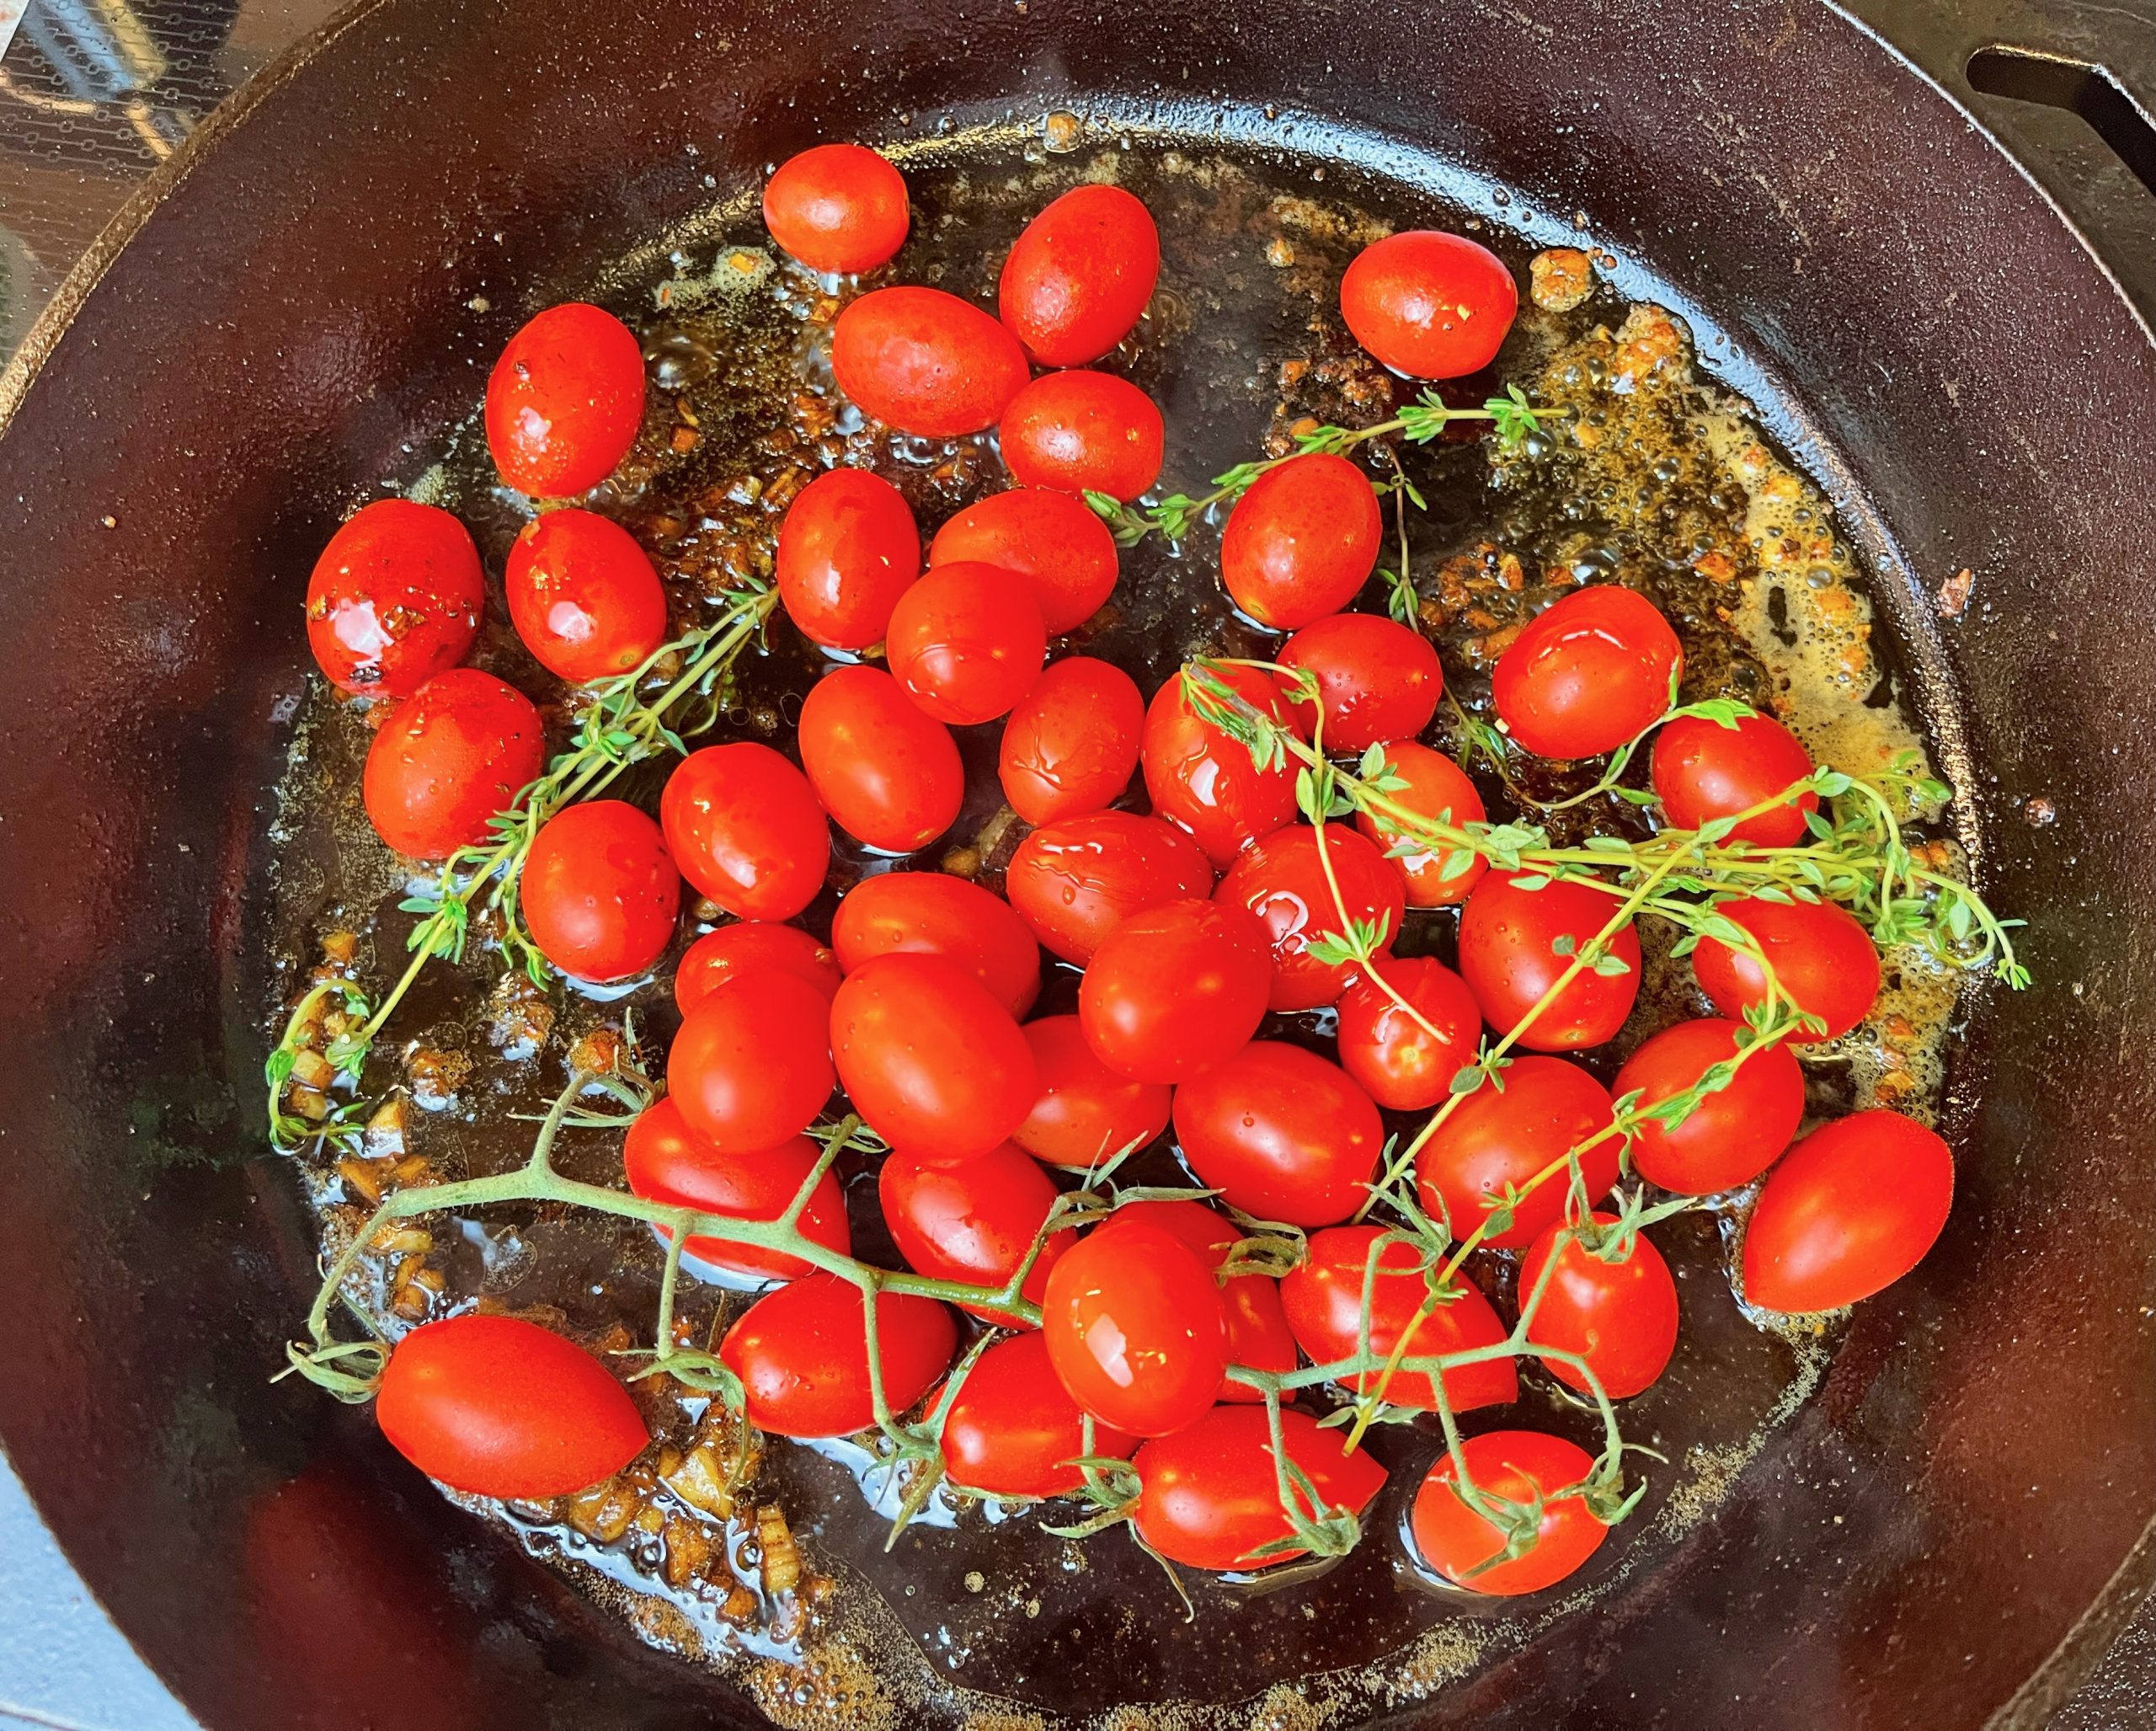 Add cherry tomatoes, and stir in balsamic vinegar, honey, and thyme sprigs.